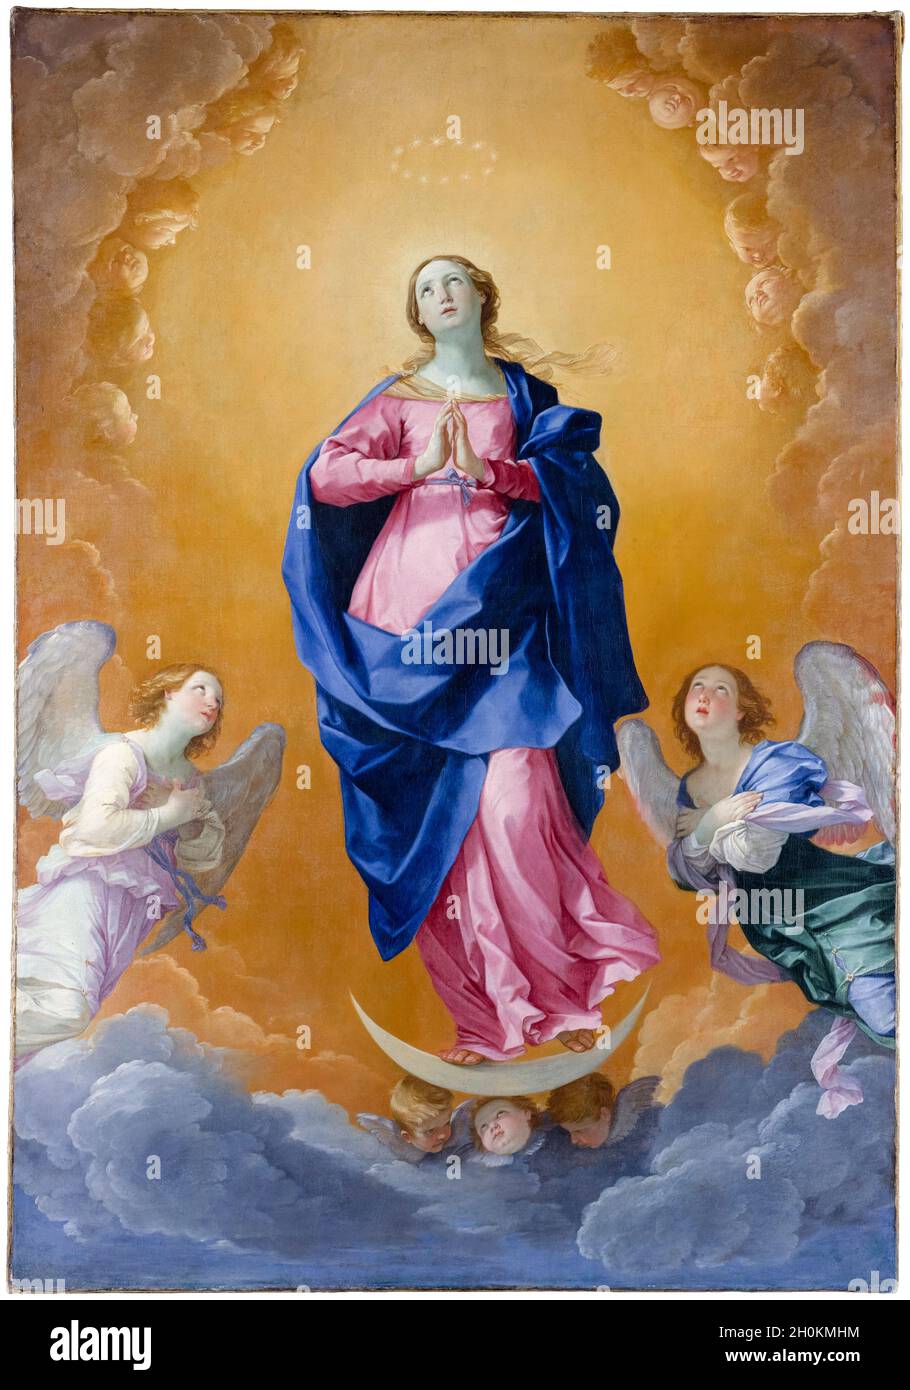 Guido Reni, The Immaculate Conception, painting, 1627 Stock Photo